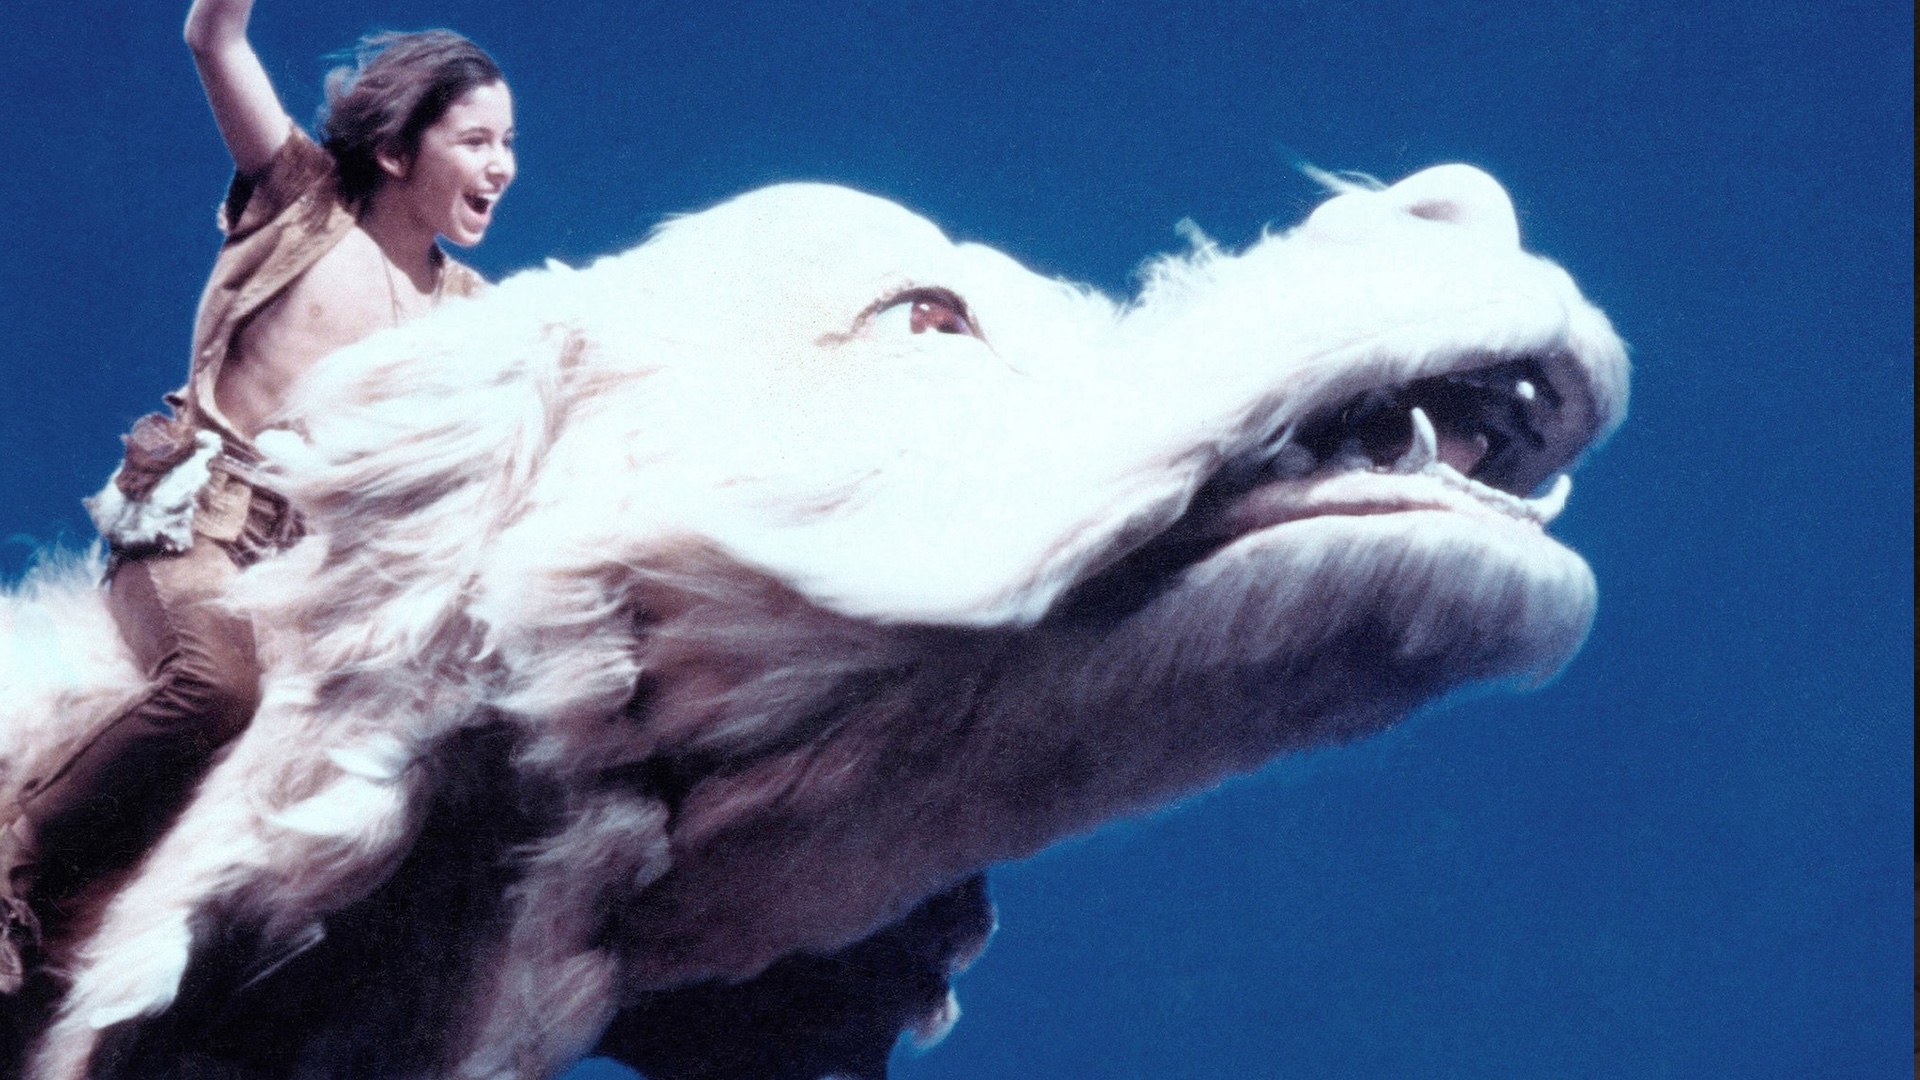 Fascinating Documentary On The Neverending Story Features Cool Behind The Scenes Footage